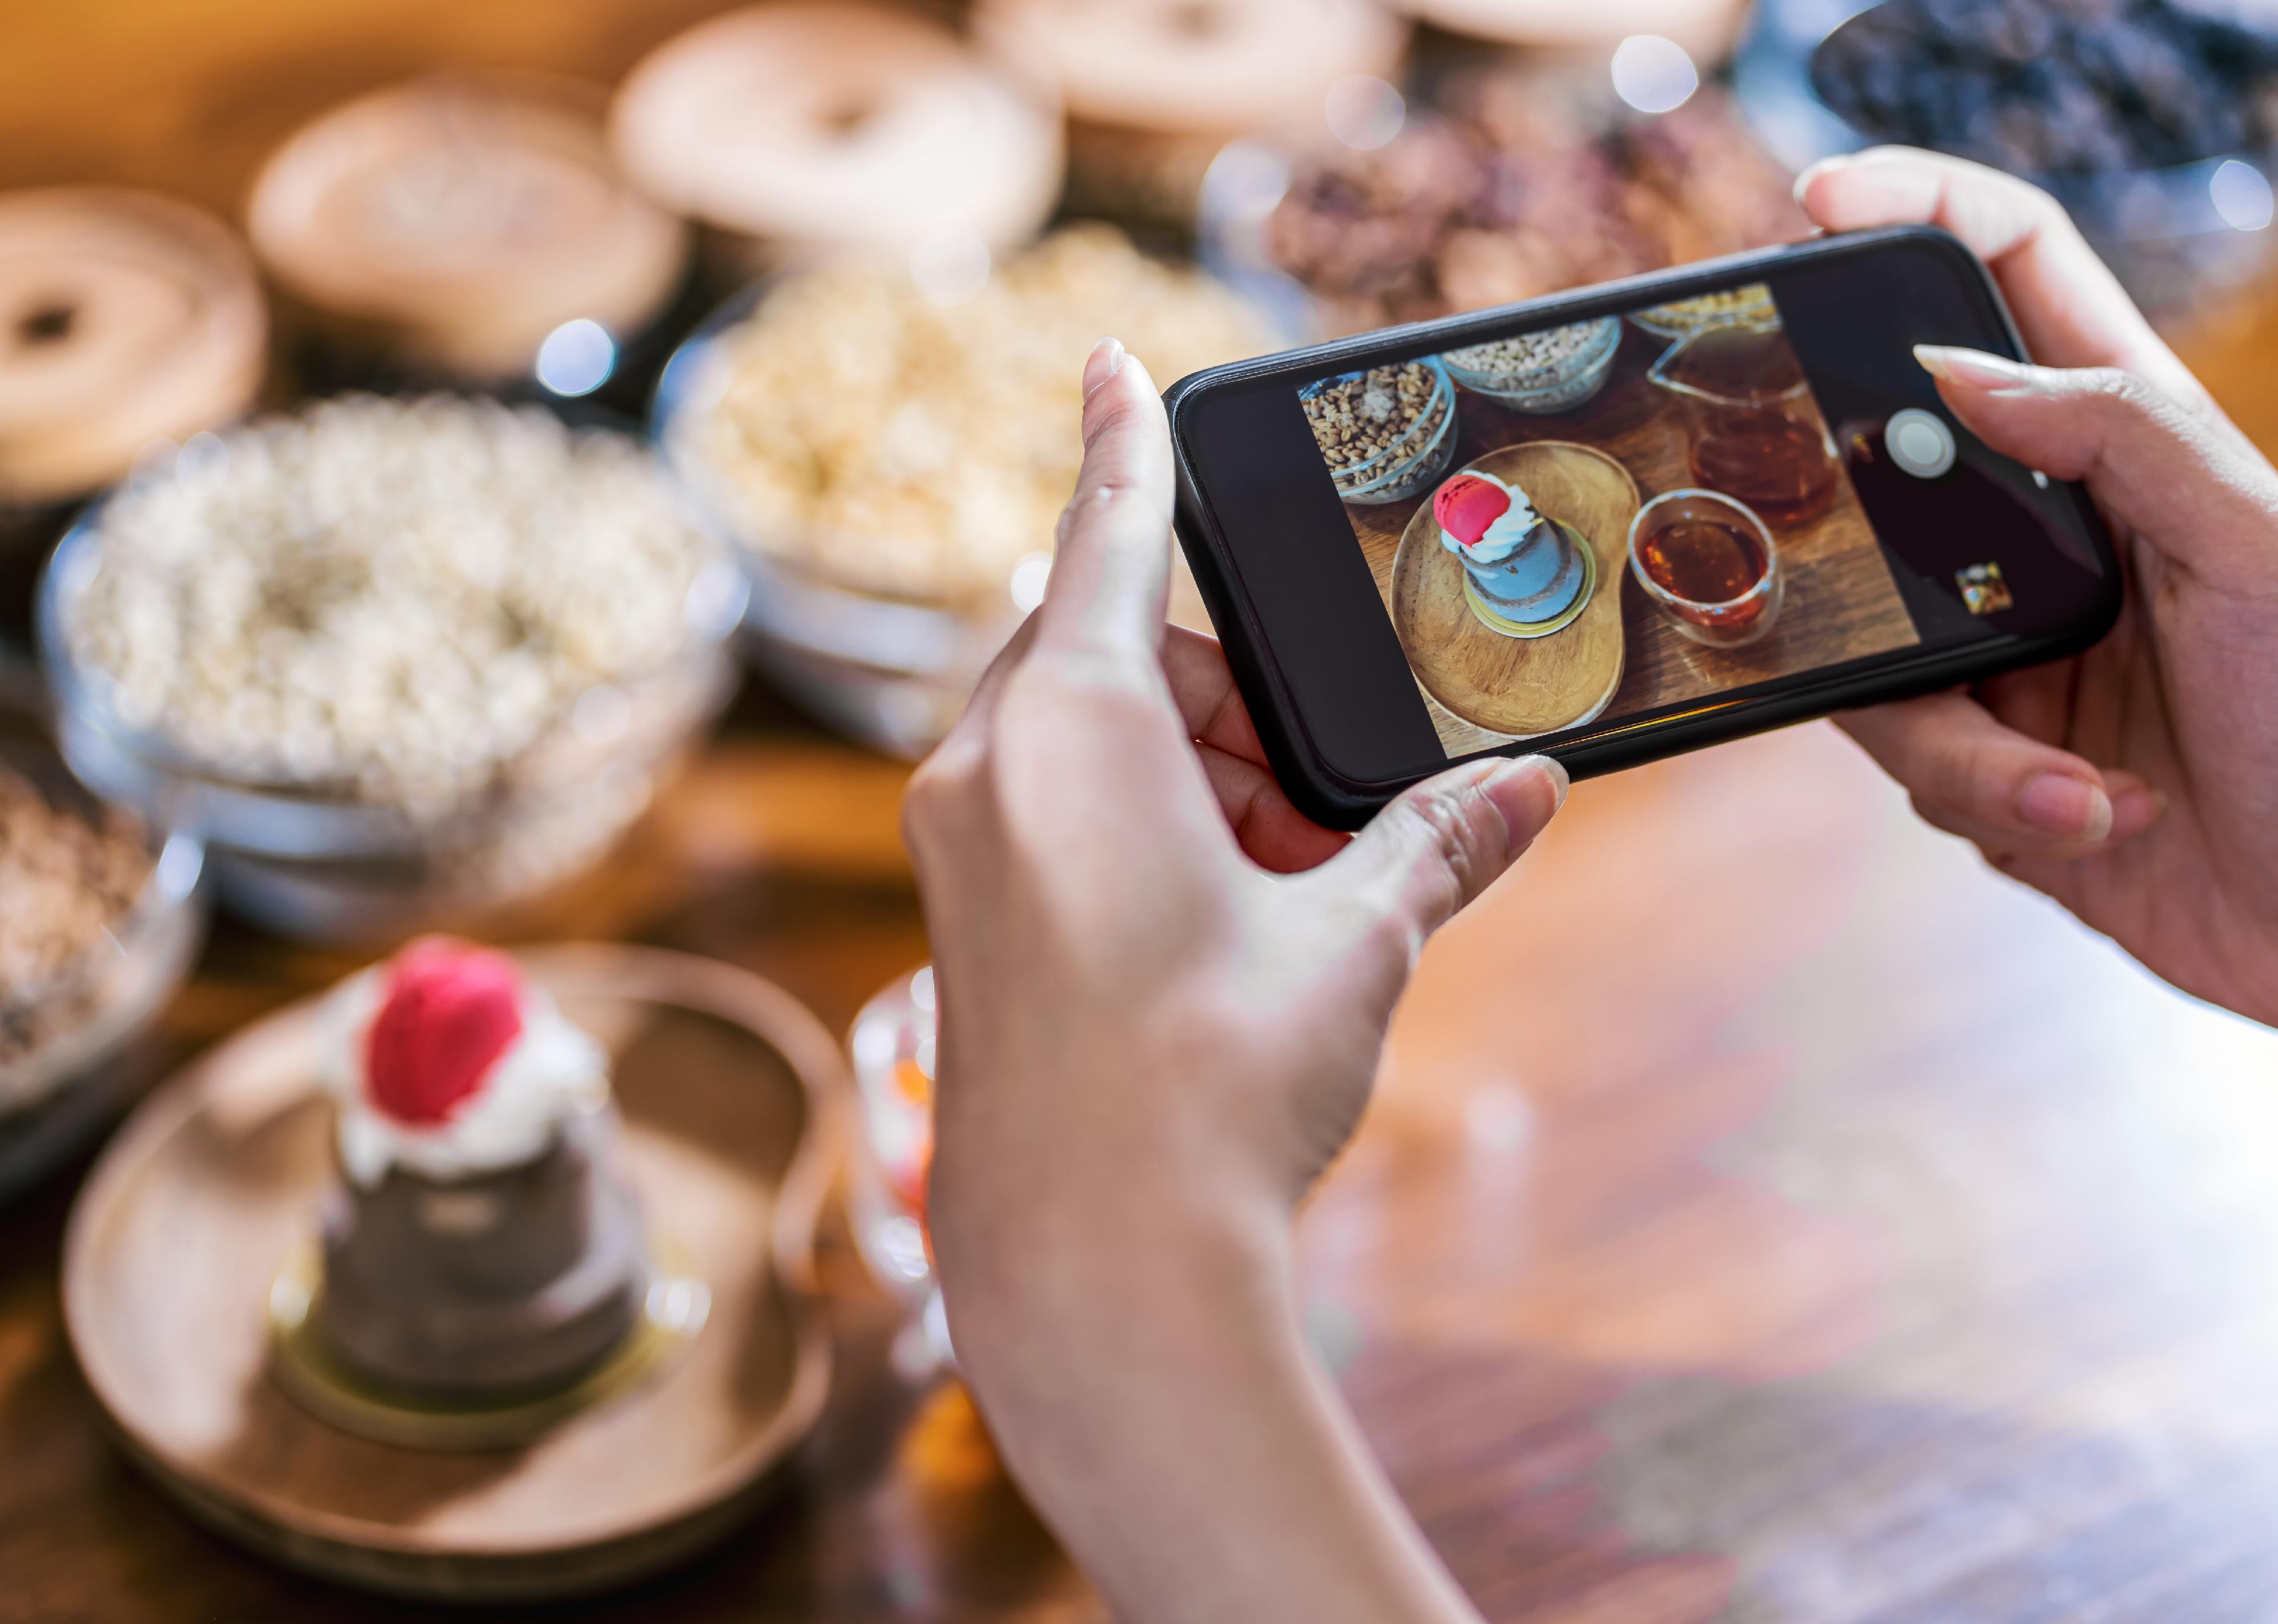 Close-up of a person with mobile phone taking photo of cupcake.